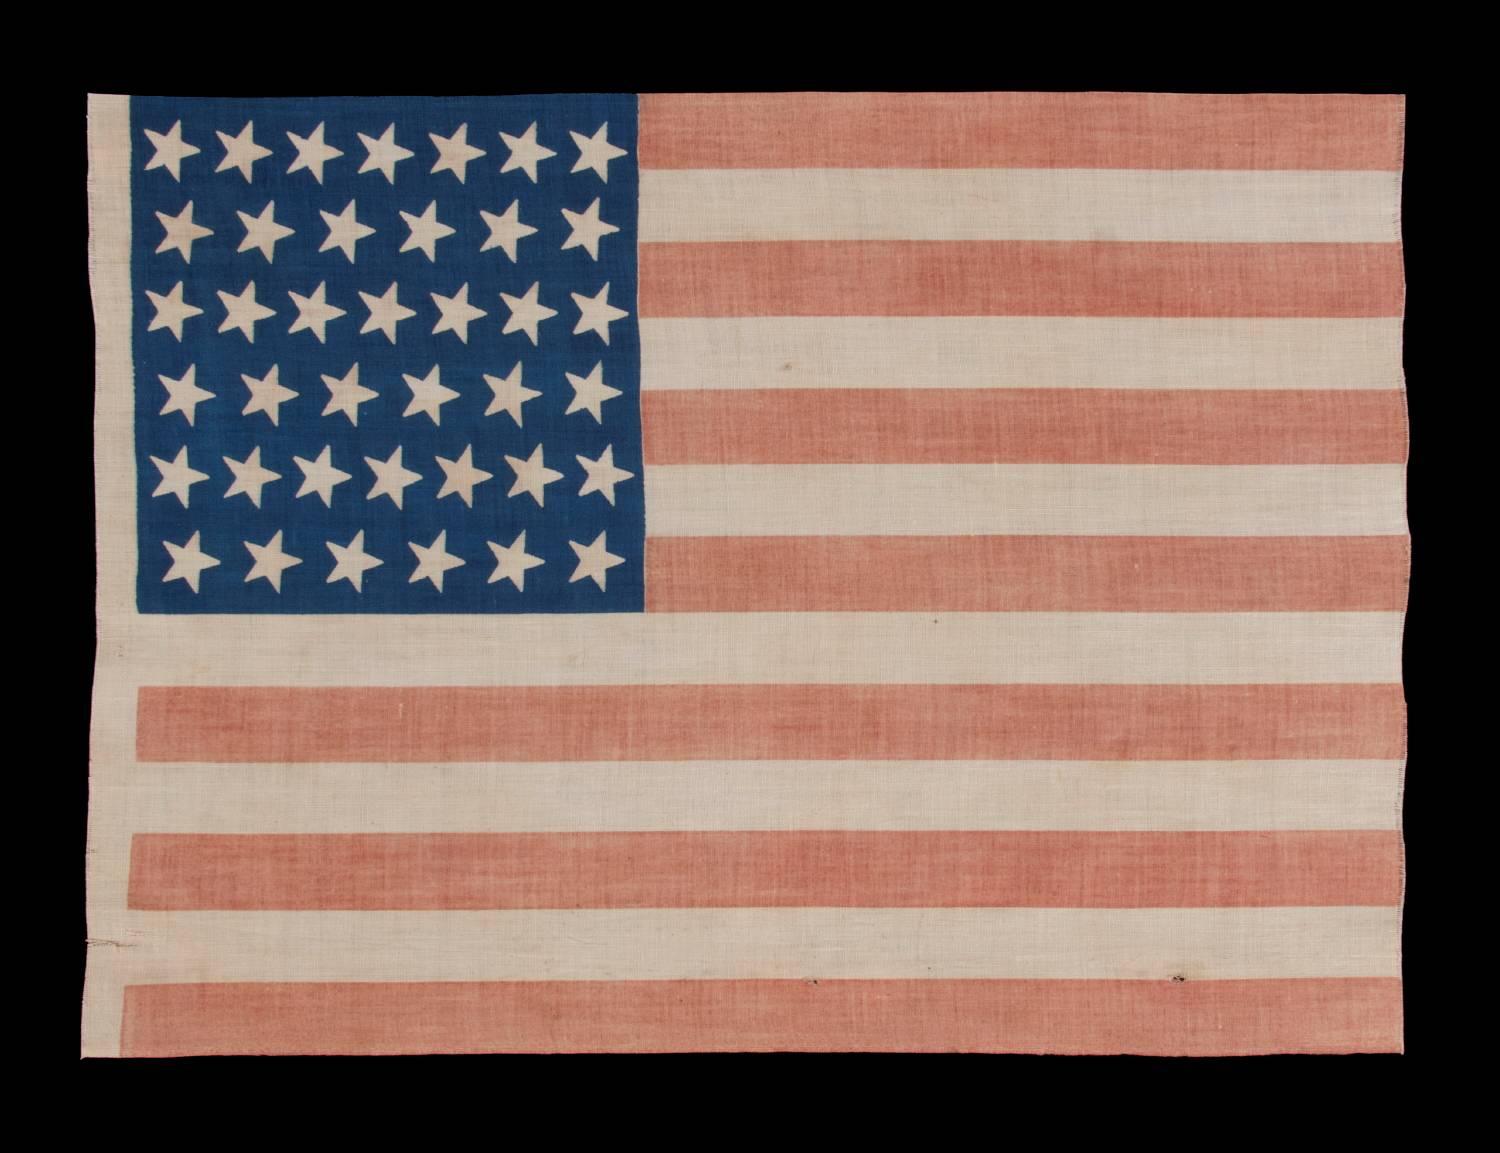 39 Tilted stars on an antique American flag with a royal blue canton, never an official star count, 1876-1889:

39 star American parade flag, printed on plain weave cotton. 39 star American national parade flag, printed on plain weave cotton. The